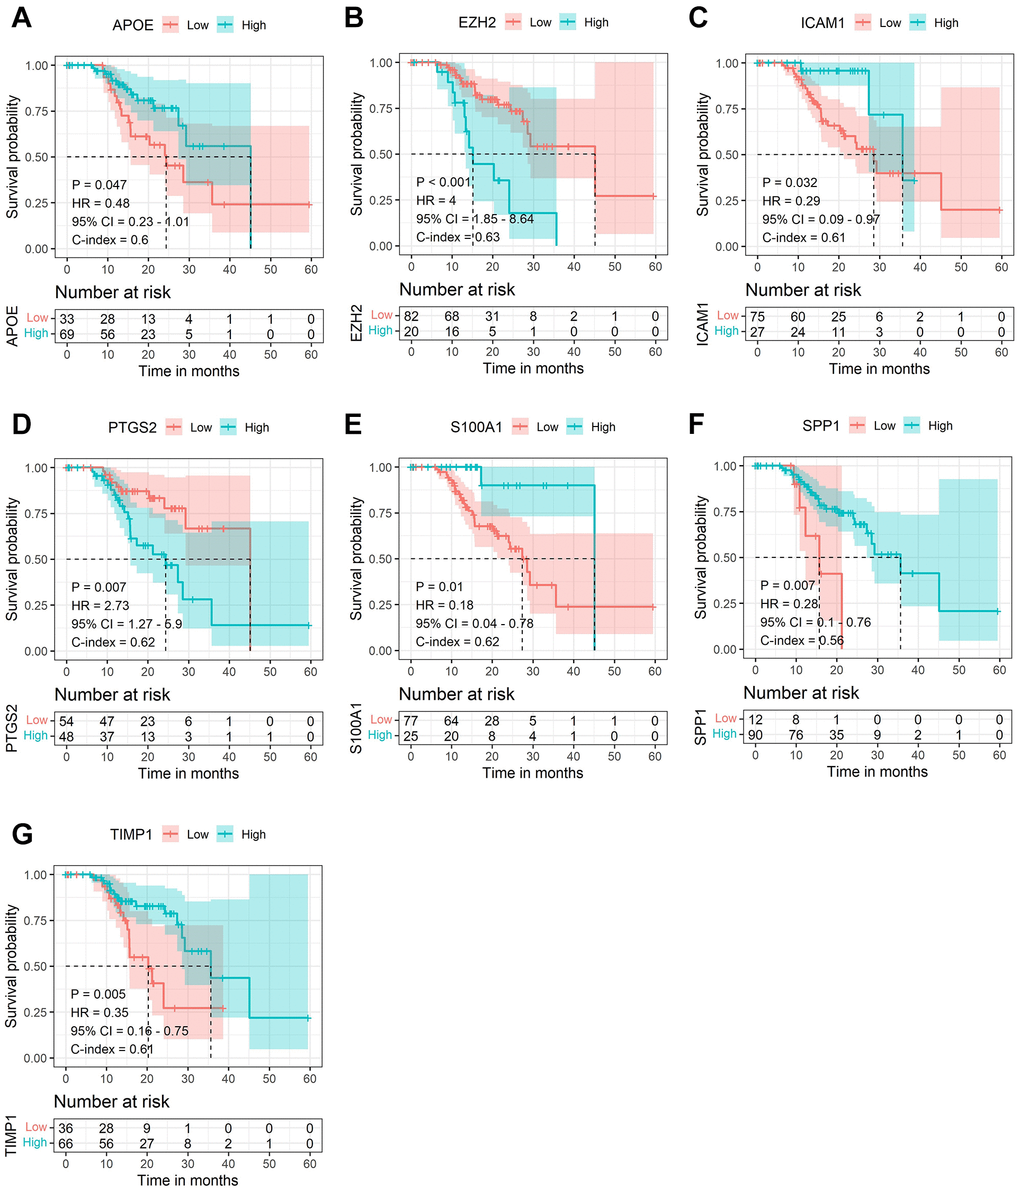 The Kaplan-Meier survival analysis of the selected DE-AFs. Survival analysis of the selected DE-AFs in the TCGA cohort, APOE (A), EZH2 (B), ICAM1 (C), PTGS2 (D), S100A1 (E), SPP1 (F) and TIMP1 (G). High and low expression is shown in blue and red, respectively.